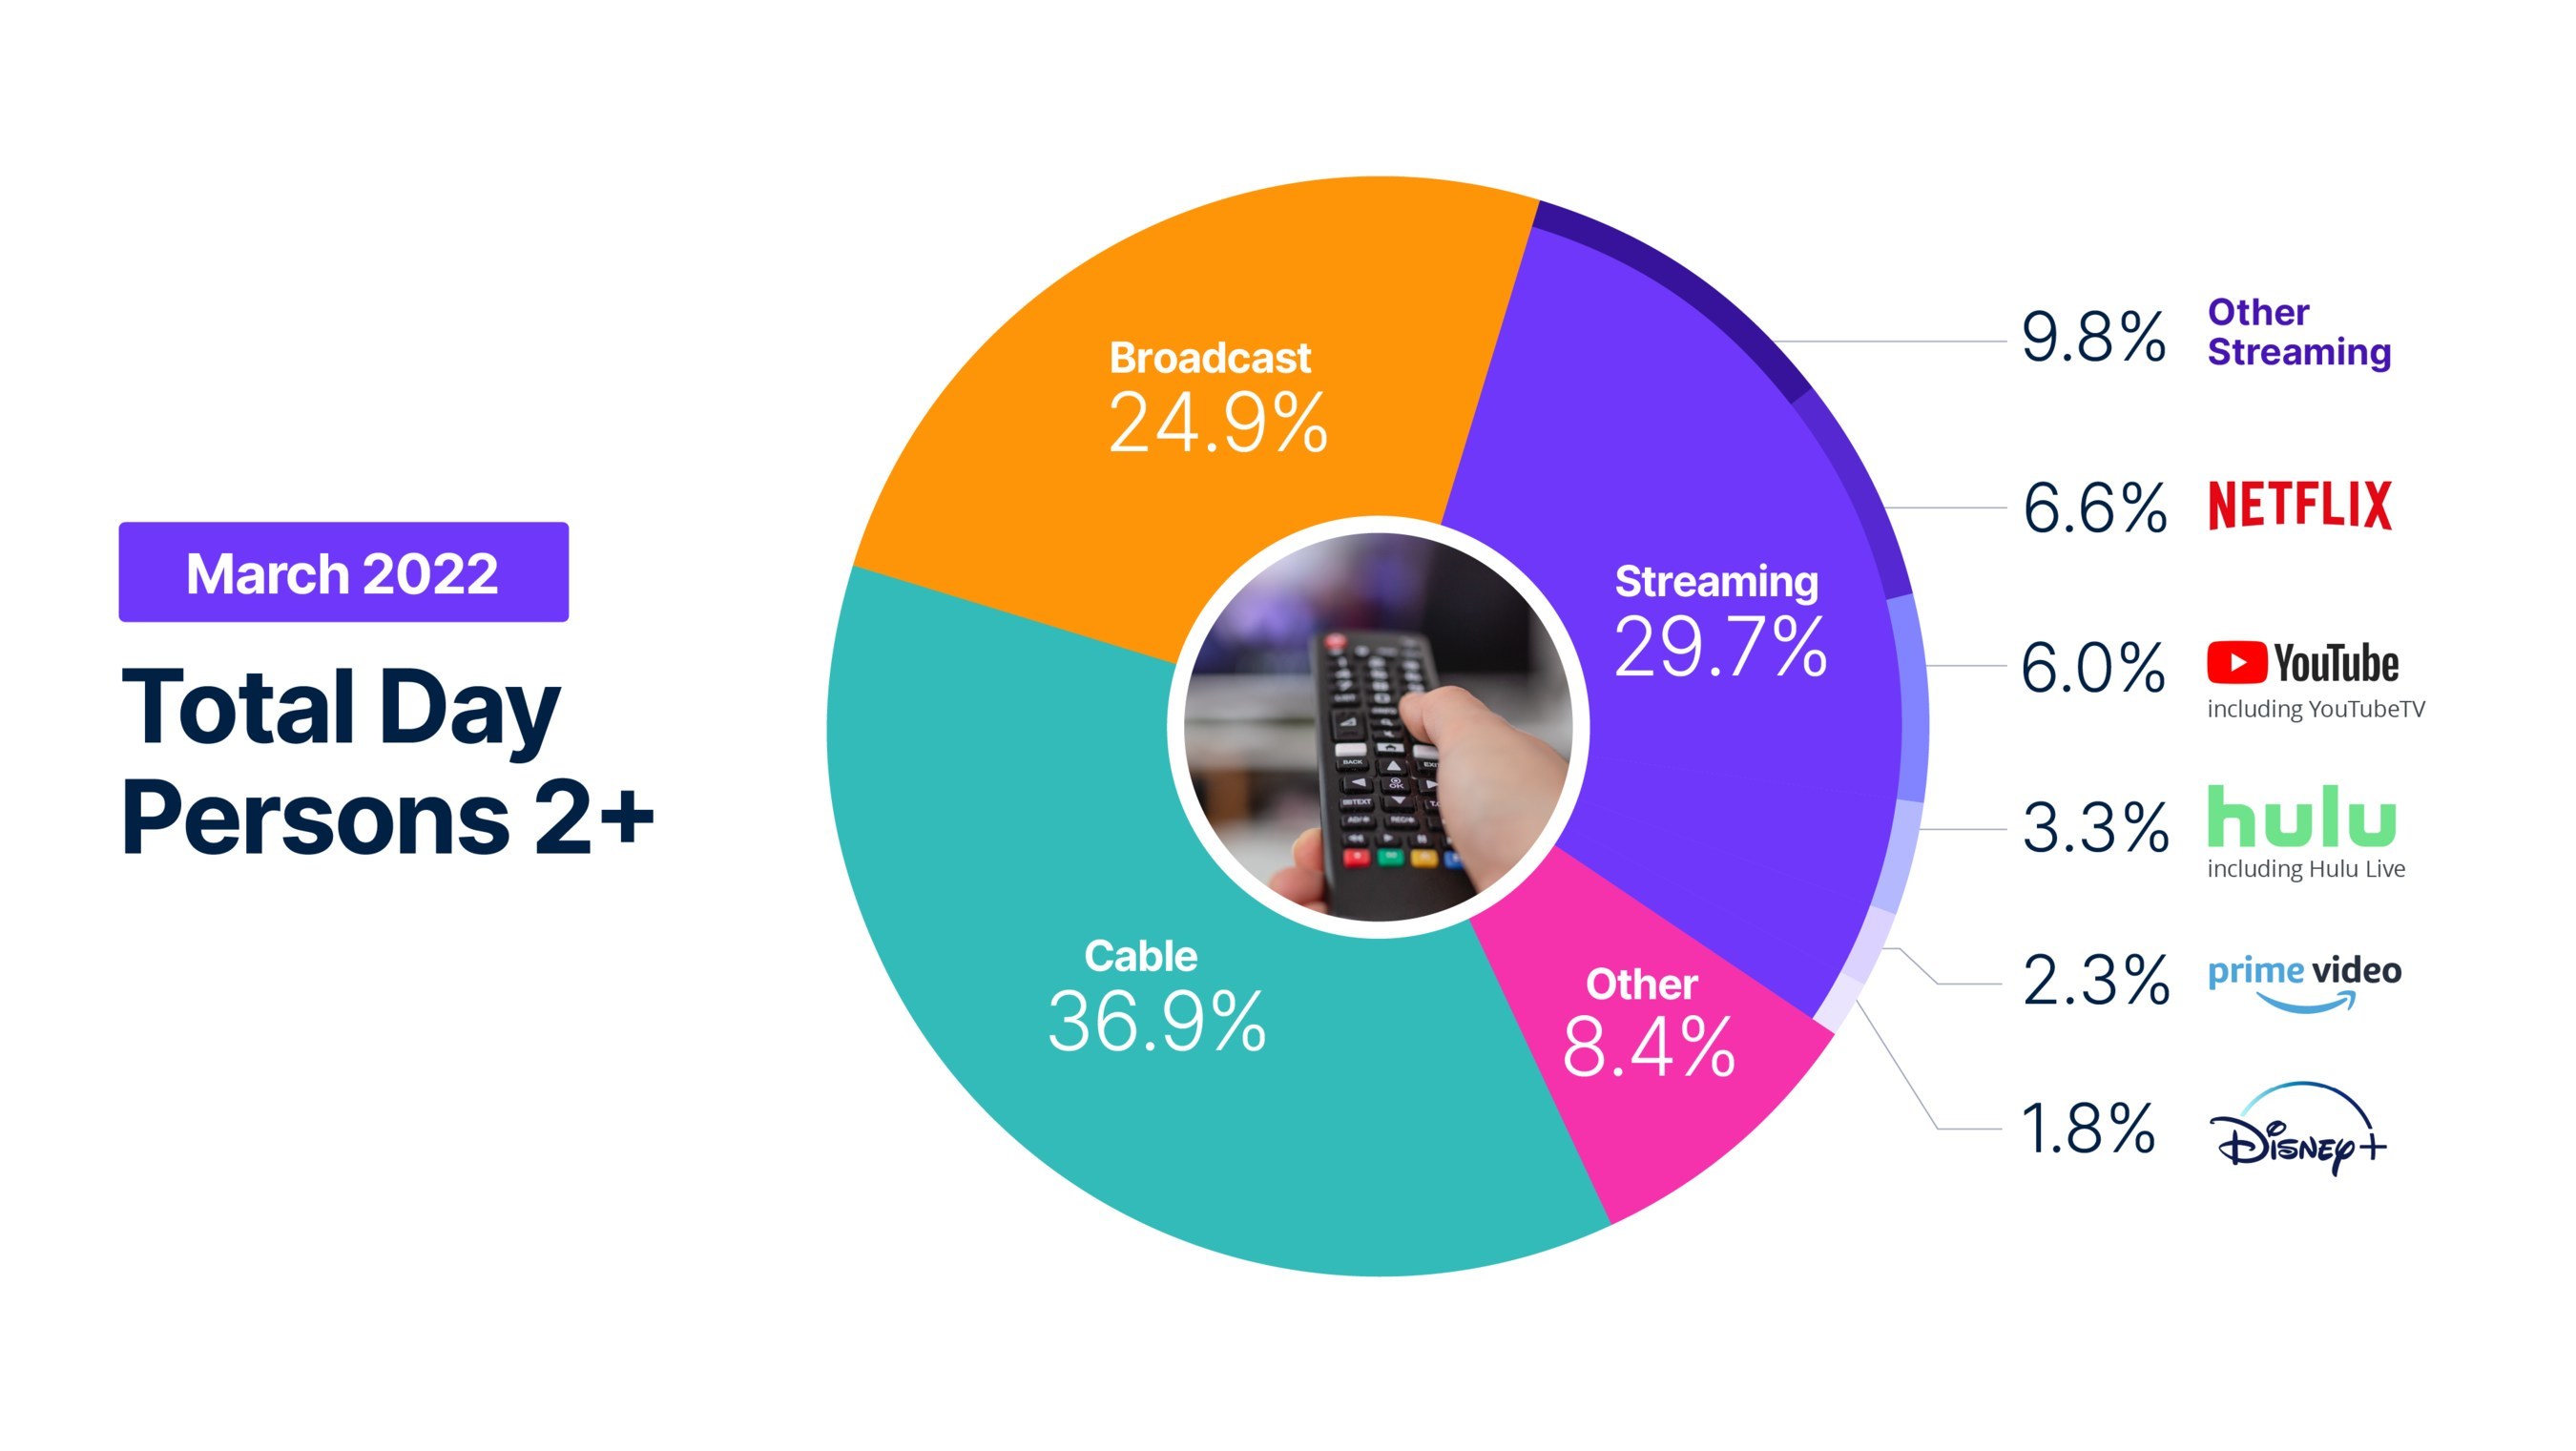 Nielsen's The Gauge: March 2022 - Total Day Persons 2+ - Cable, Streaming (Netflix, YouTube, Hulu, Prime Video, Disney+, Other), Broadcast shares